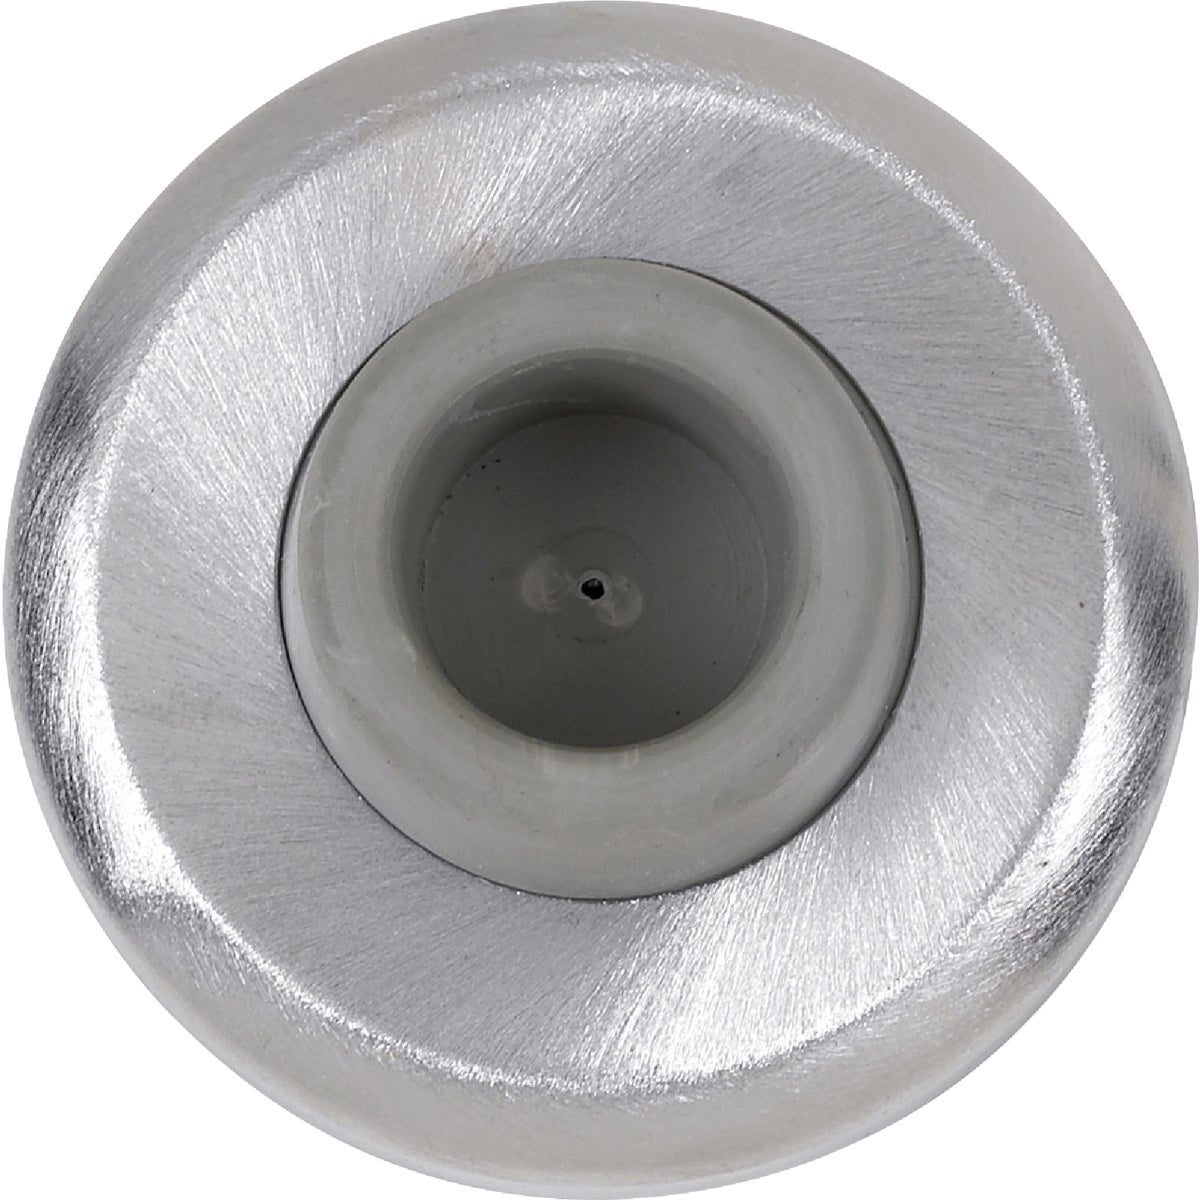 Item 205389, Cast brass 2-1/2" diameter concave wall stop with concealed mounting.